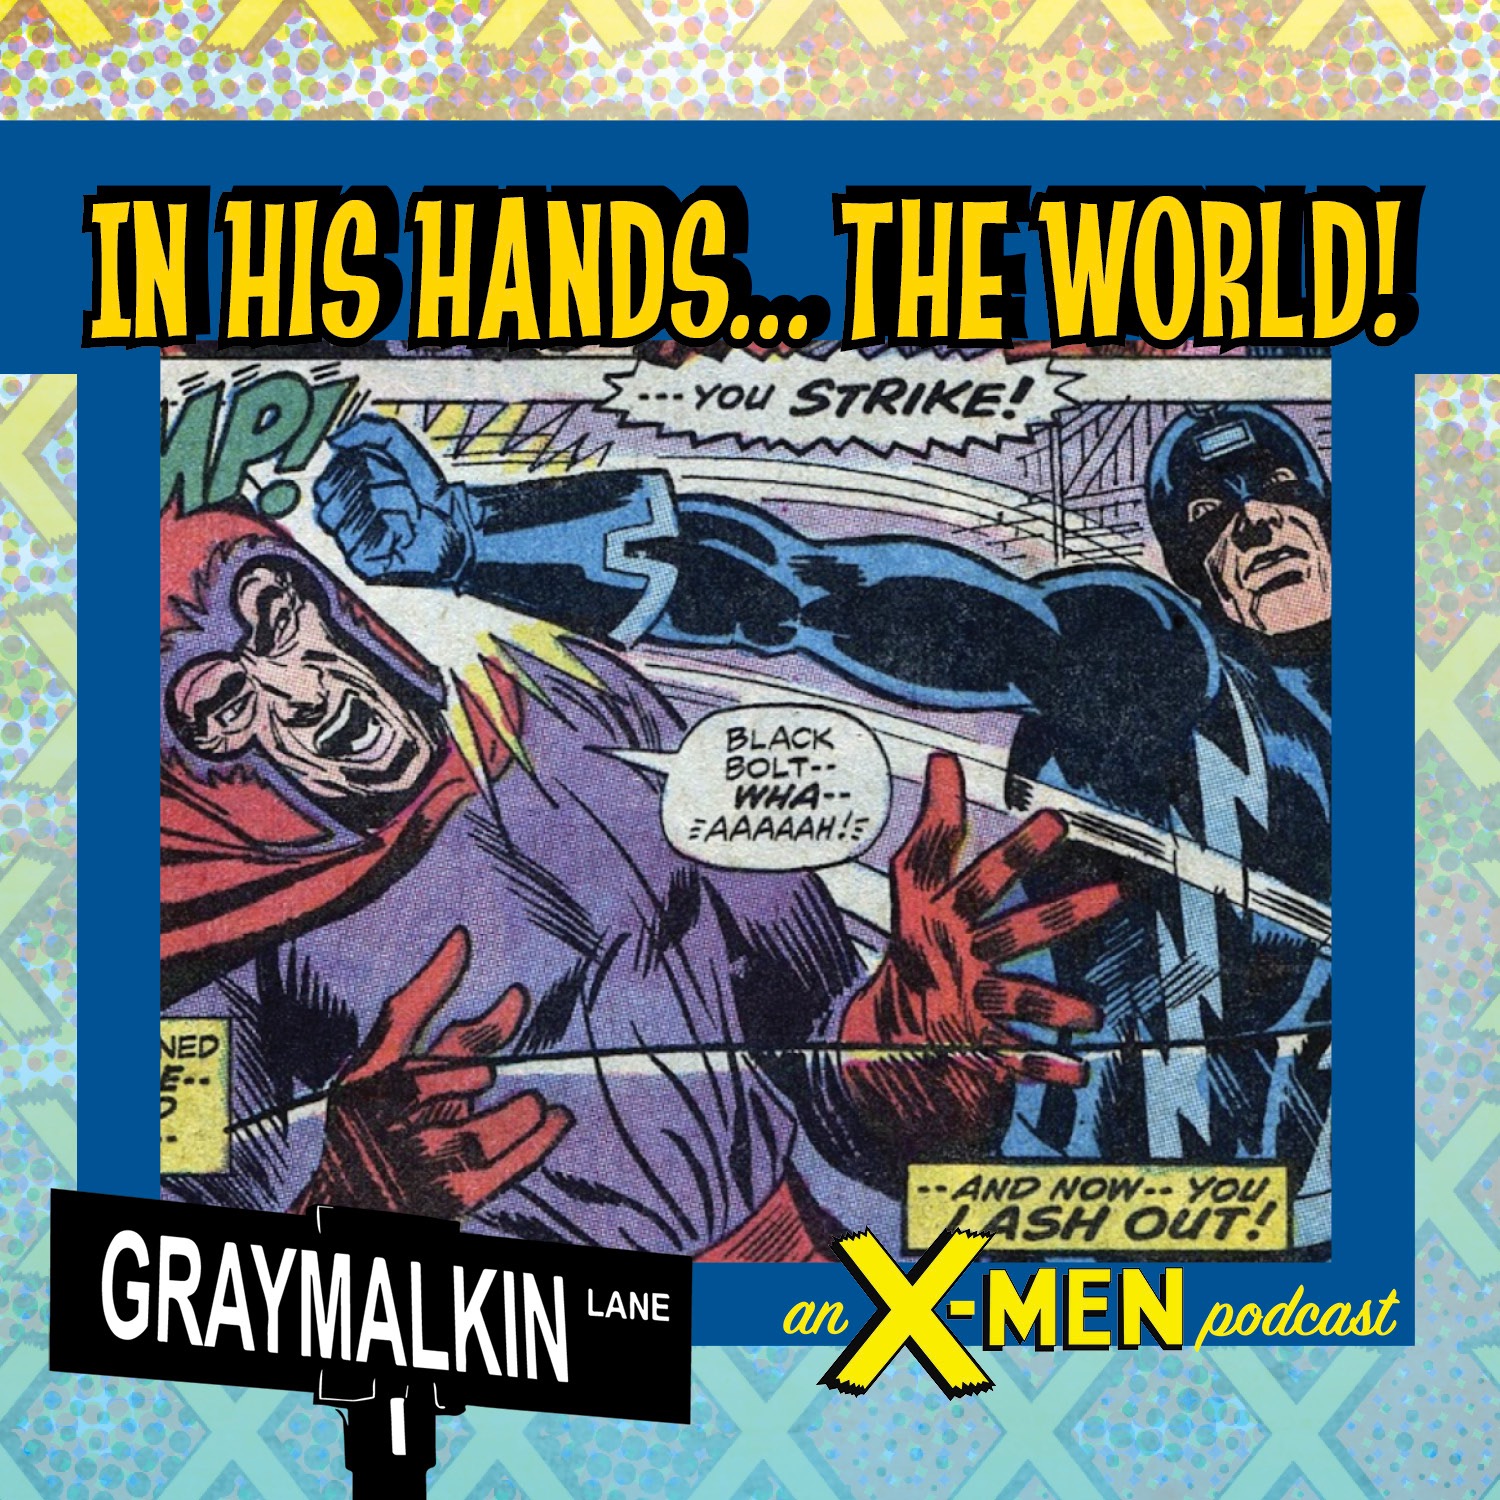 Amazing Adventures 10: In his Hands... the World! Featuring DG Chichester! Gregory Wright! And Daryl Lawrence!